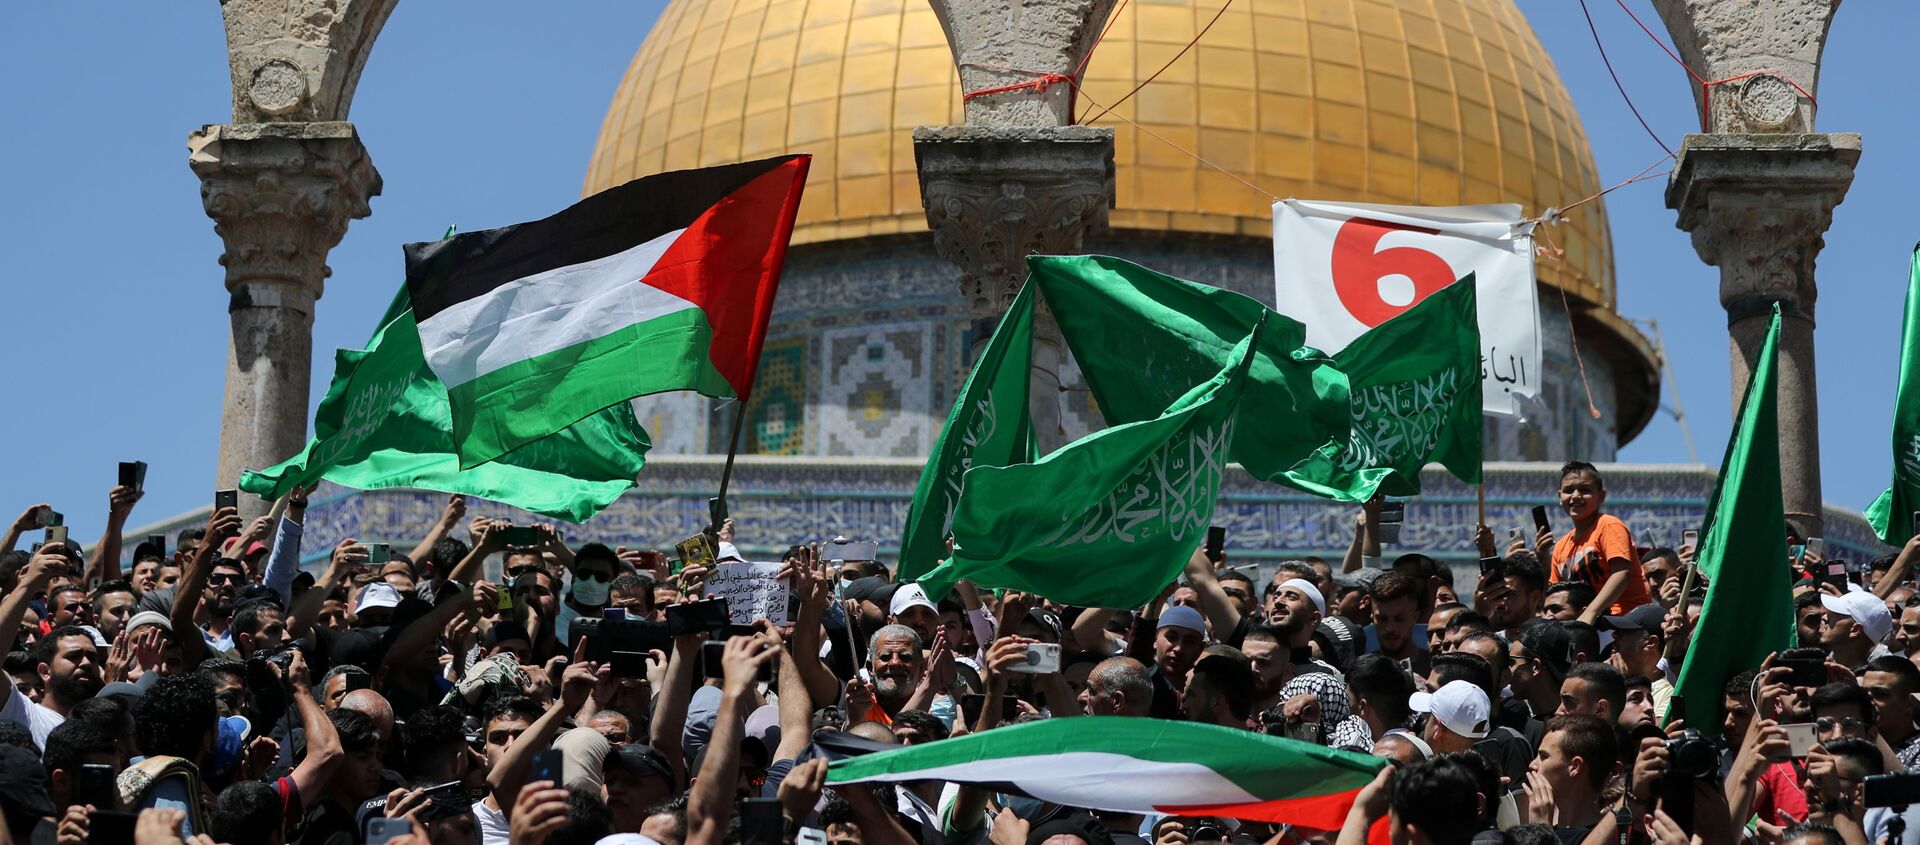 Palestinians gather after performing the last Friday of Ramadan to protest over the possible eviction of several Palestinian families from homes on land claimed by Jewish settlers in the Sheikh Jarrah neighbourhood, in Jerusalem's Old City, May 7, 2021 - Sputnik International, 1920, 10.05.2021